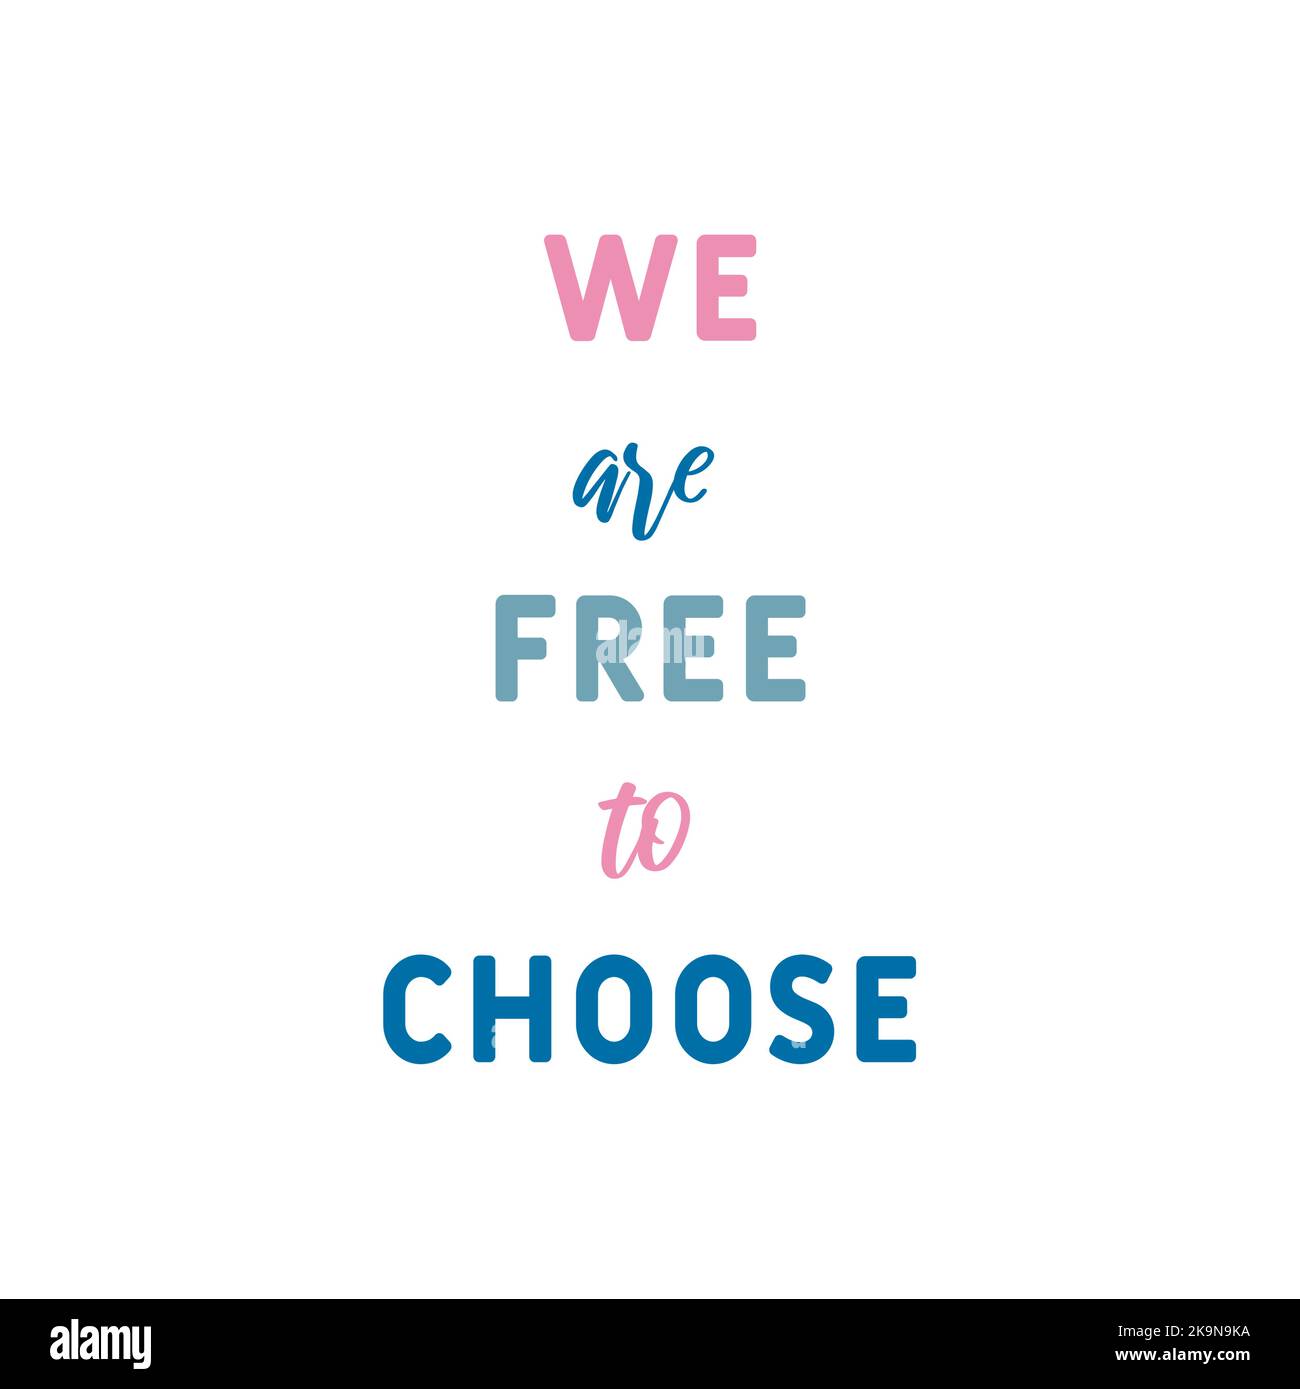 We are free to choose. Inspirational quote. Motivational lettering. Vector illustration. Card, print design. Stock Vector